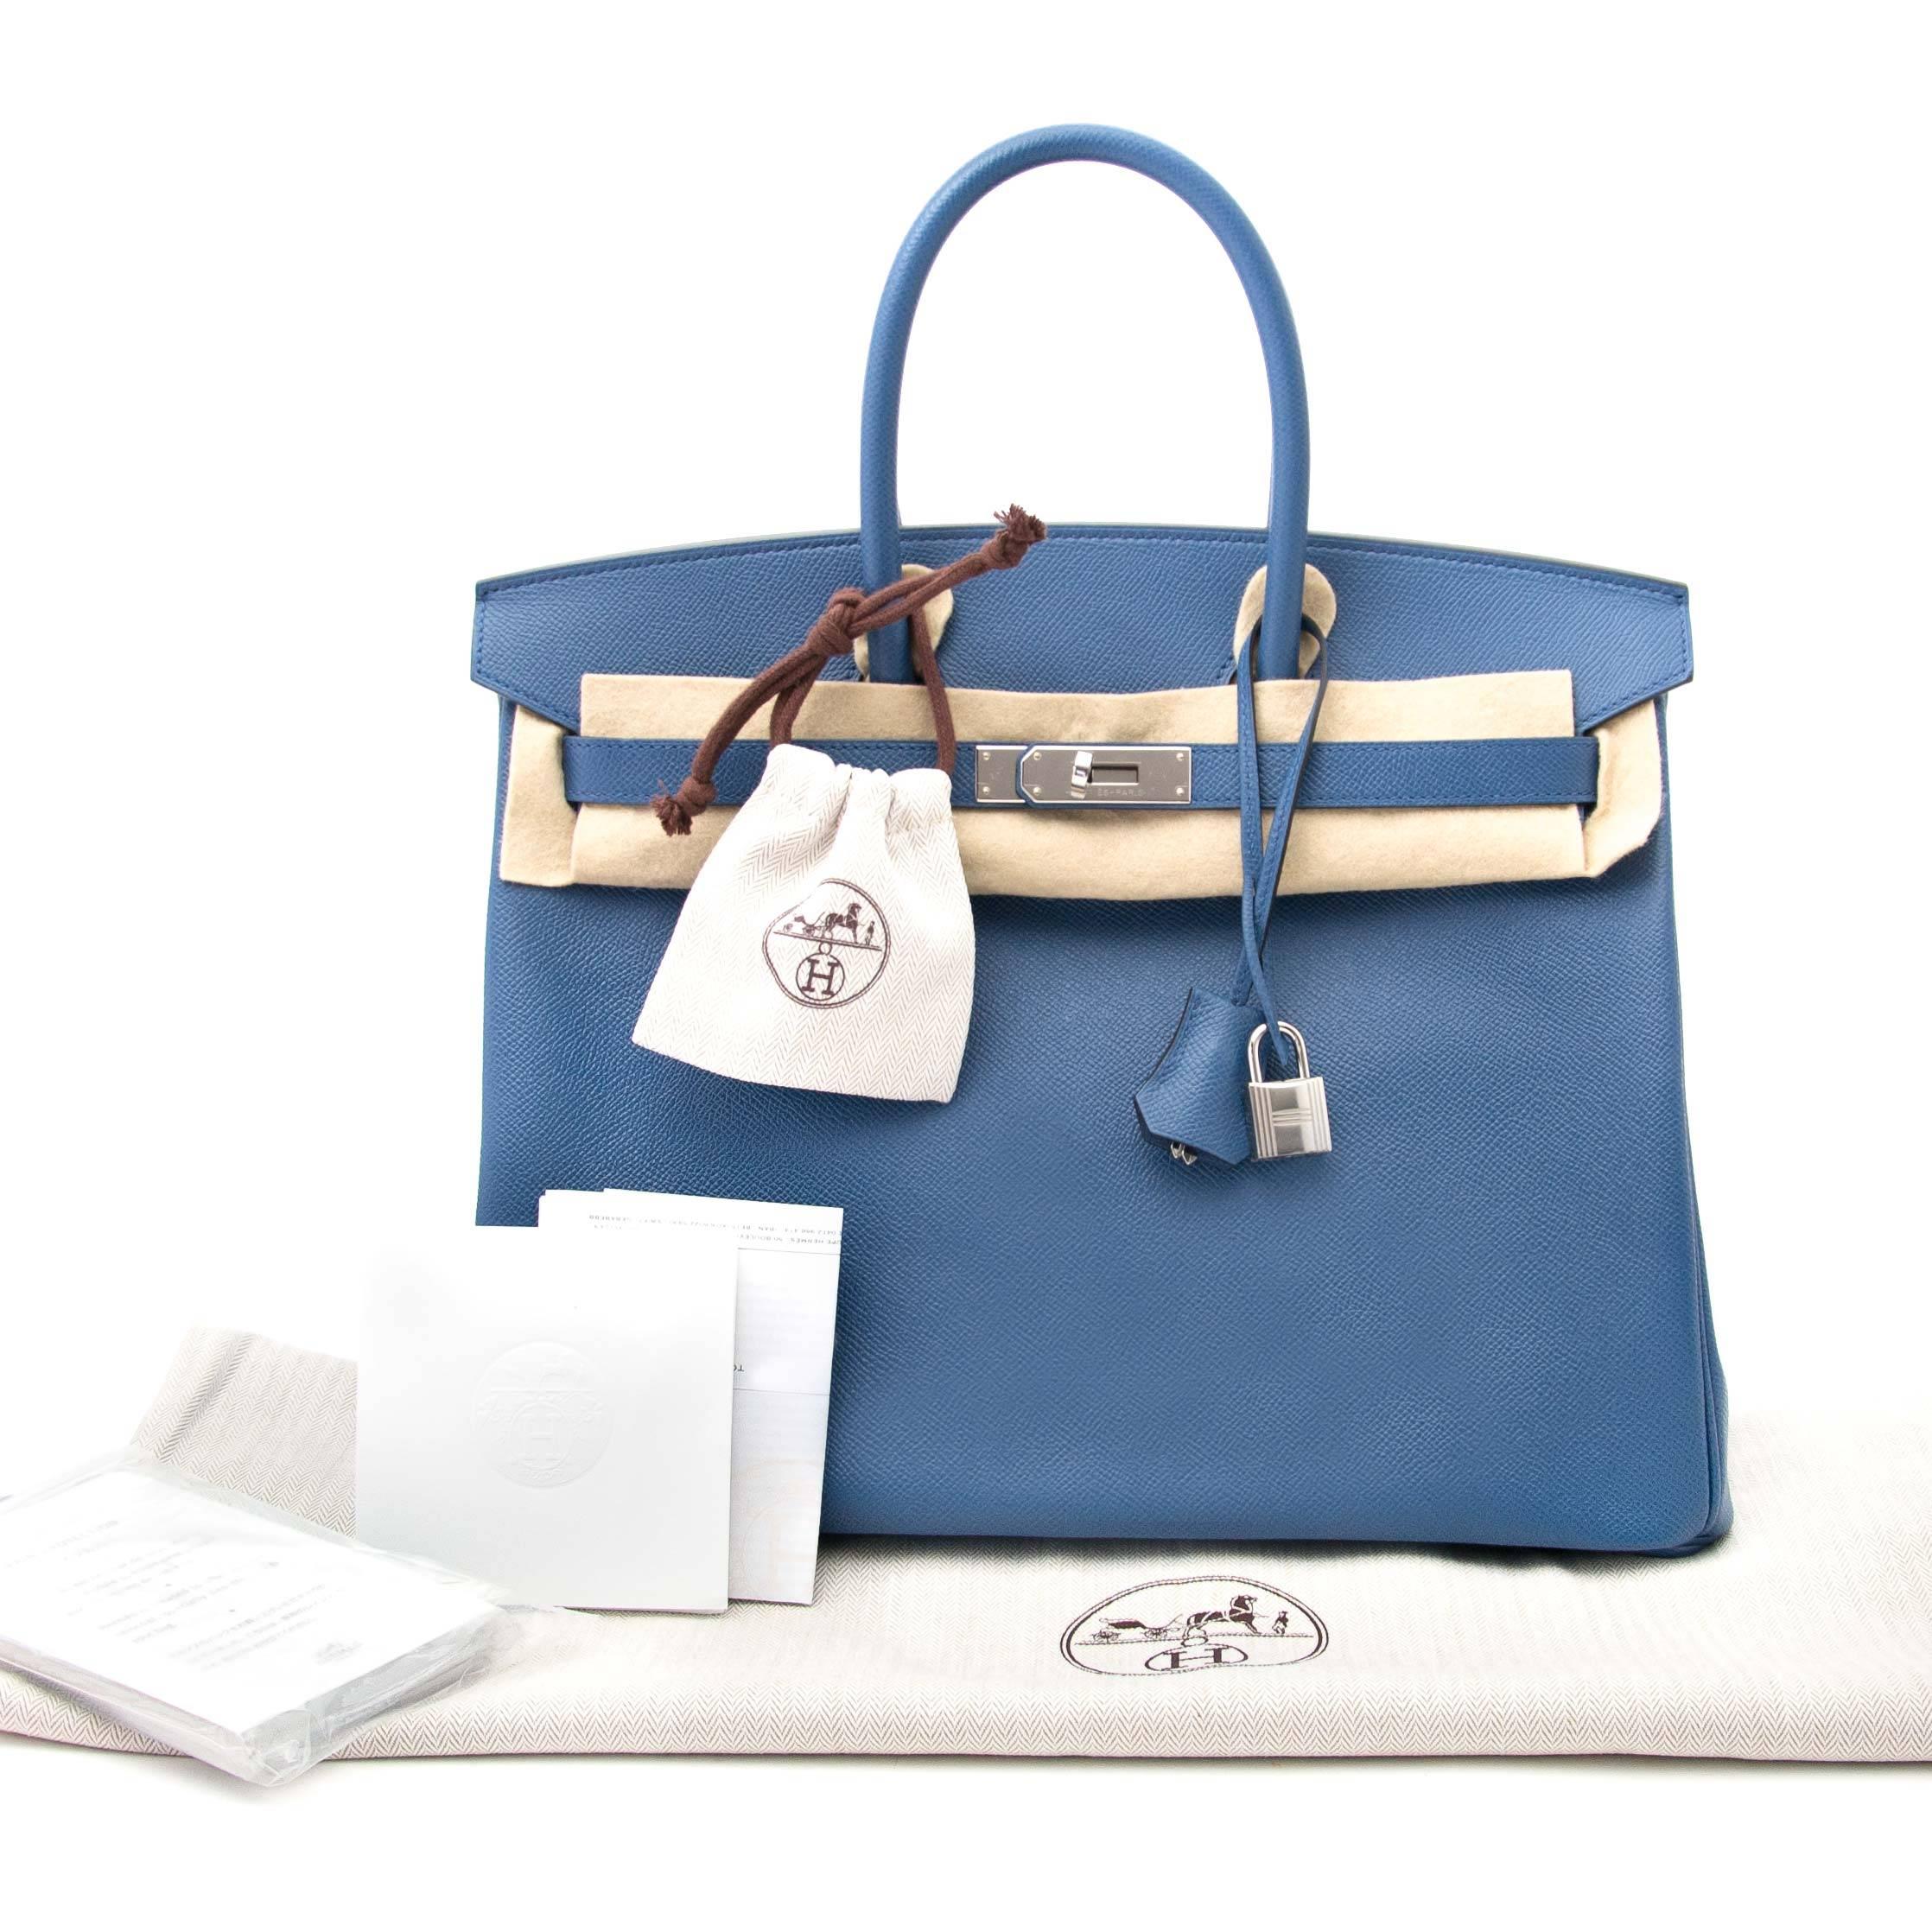 This Hermes Birkin 35 Epsom comes in the color Bleu Agate which is a soft shade of blue, bright yet subtle. The palladium hardware emphasizes the timeless Bleu Agate Epsom leather body. This embossed type of leather holds its shape in all